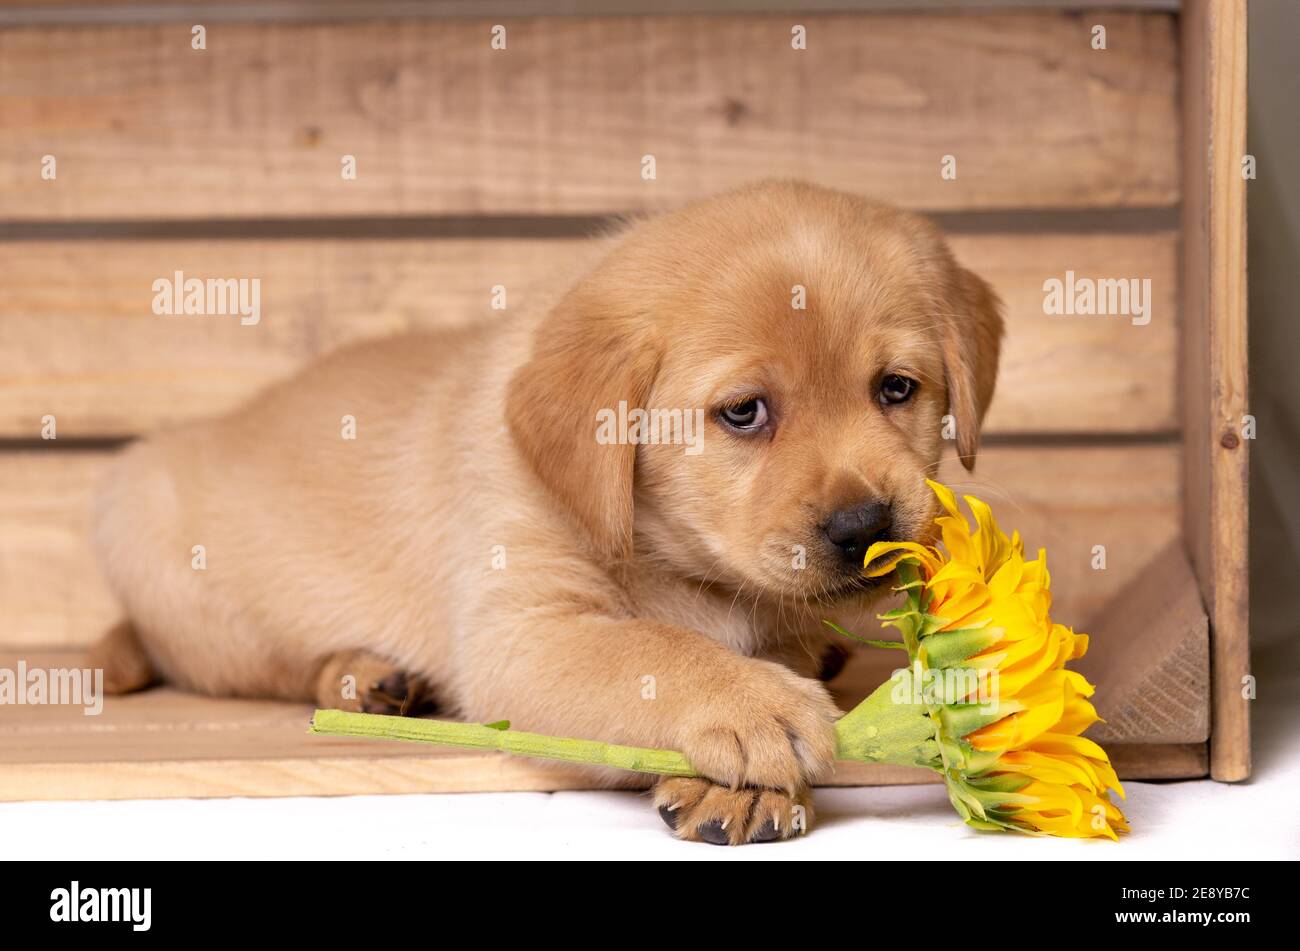 Permanent marketing Dagelijks blonde labrador puppy lies in a wooden box and holds a sunflower with his  paws crossed and looks sweet. copy space Stock Photo - Alamy